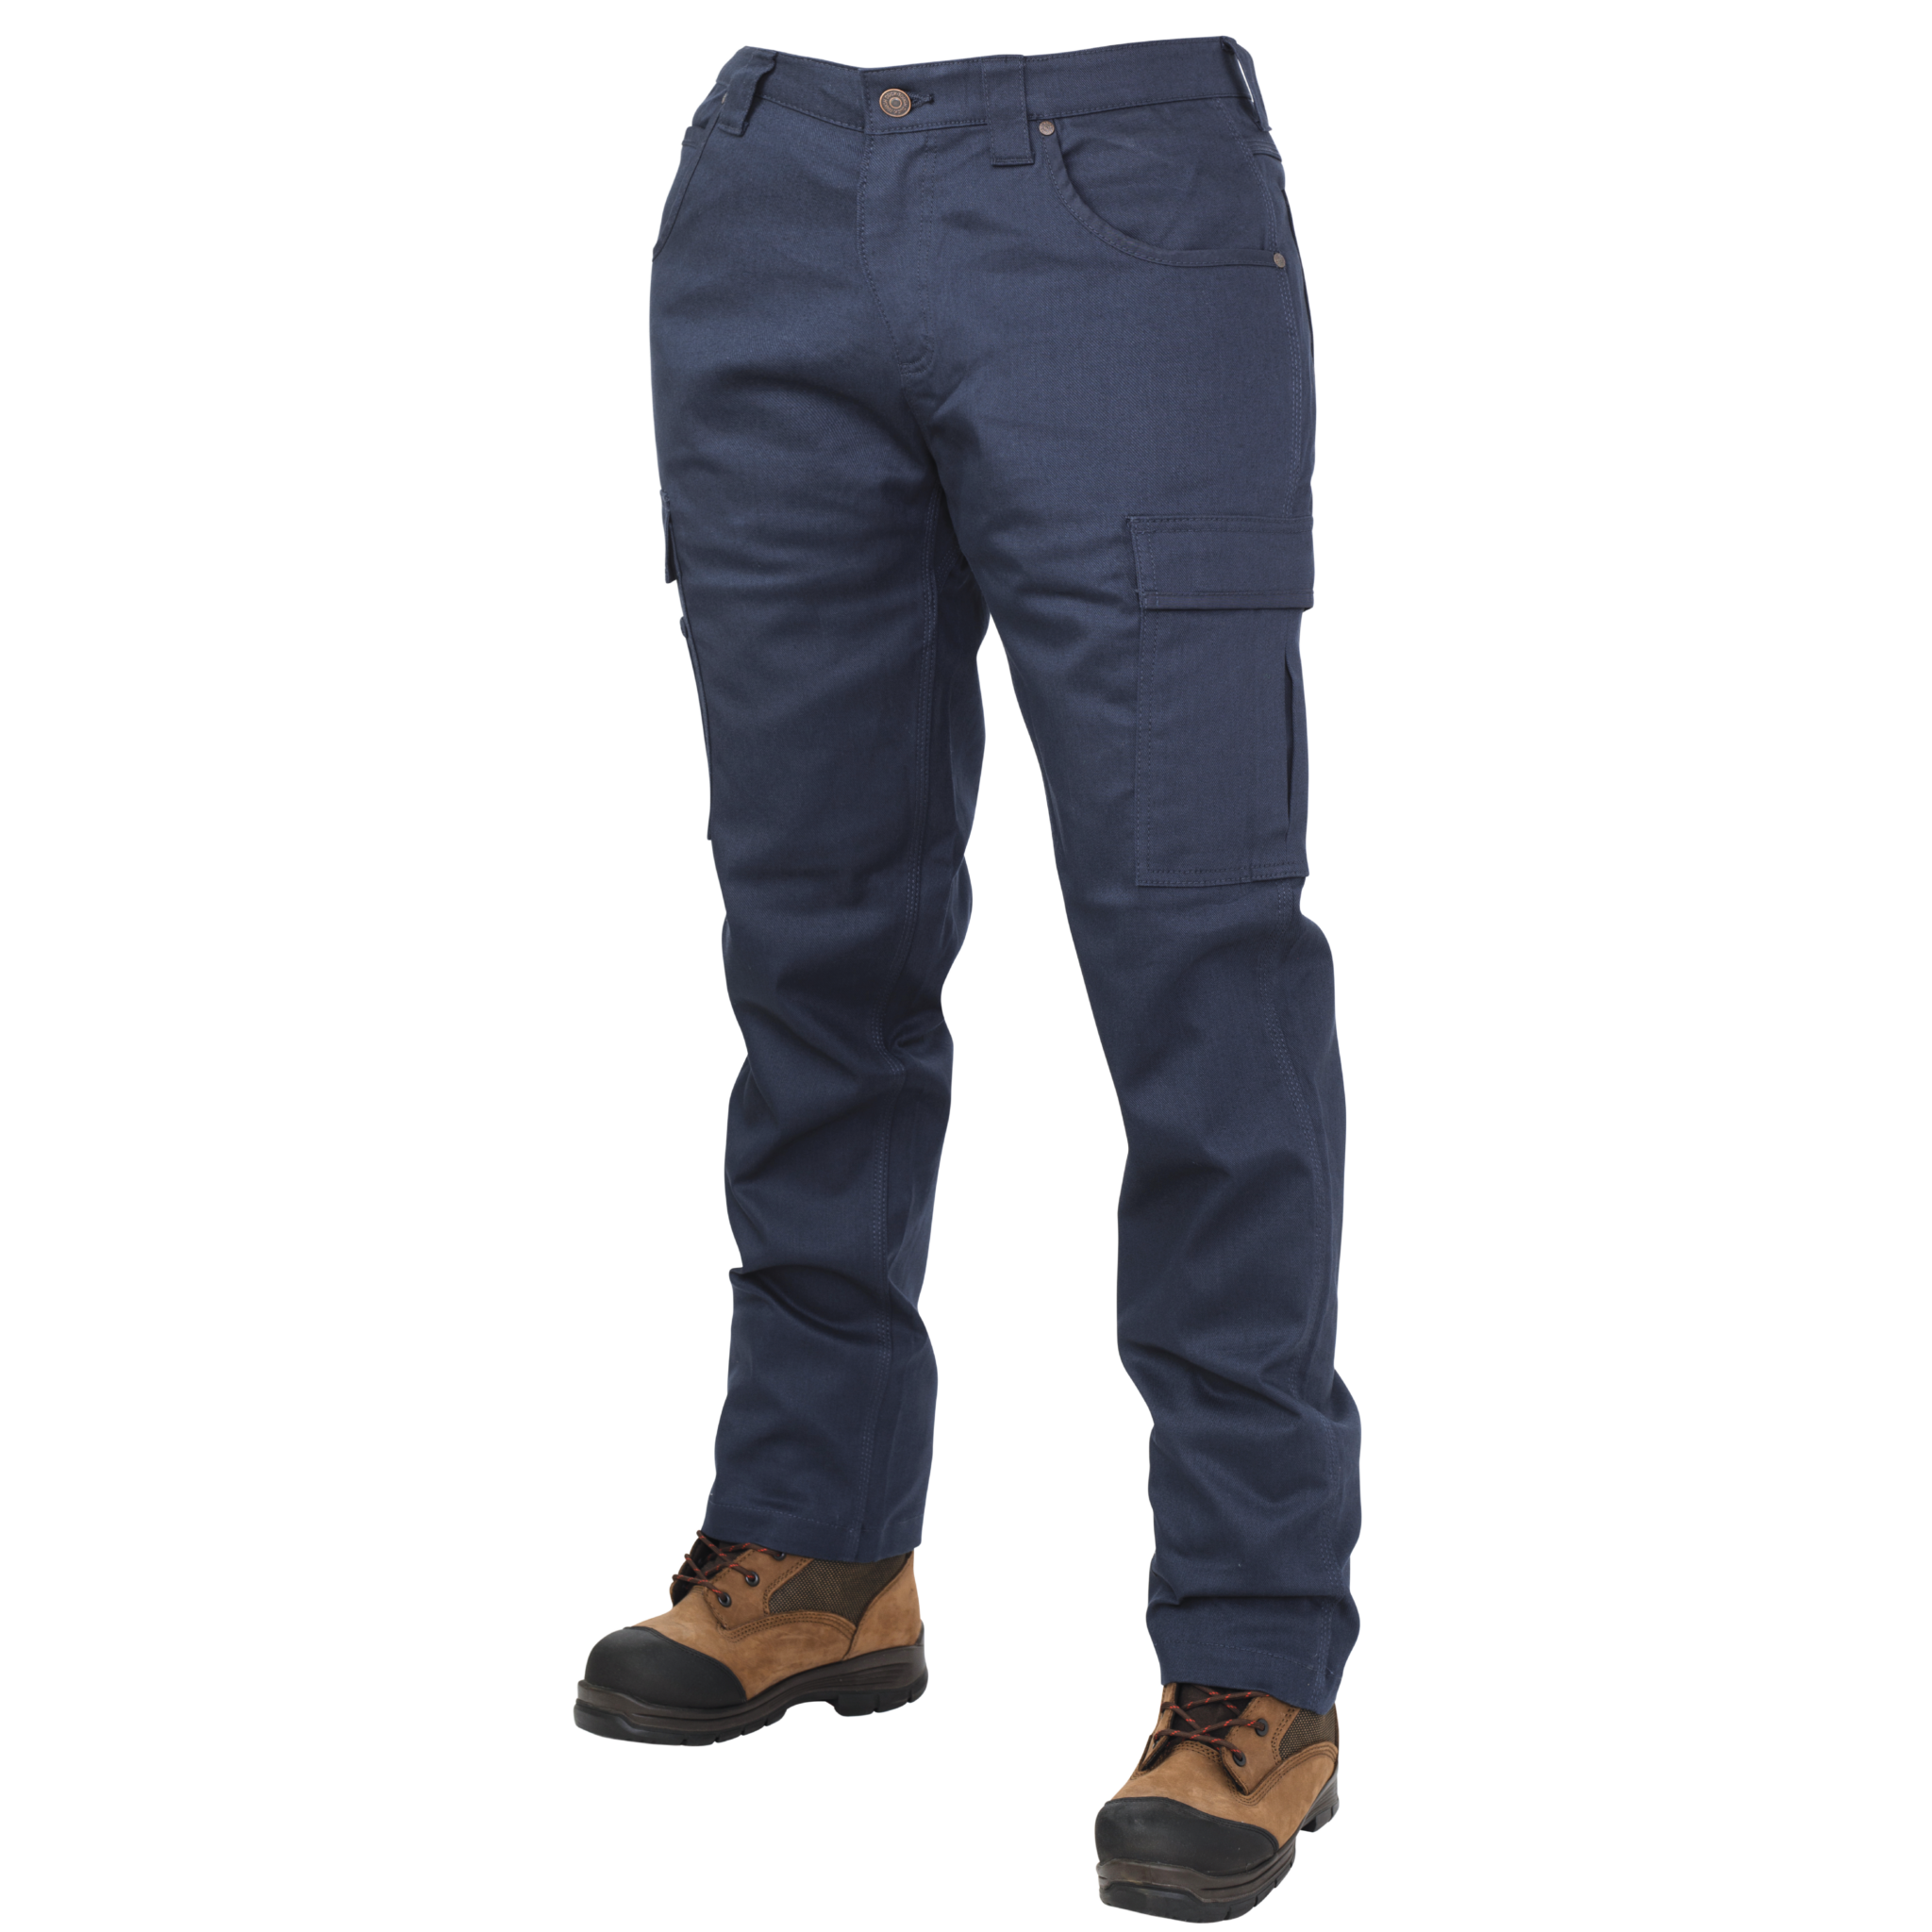 https://toughduck.com/wp-content/uploads/2021/07/WP10-PANTS-NAVY-FRONT_resized-01.png